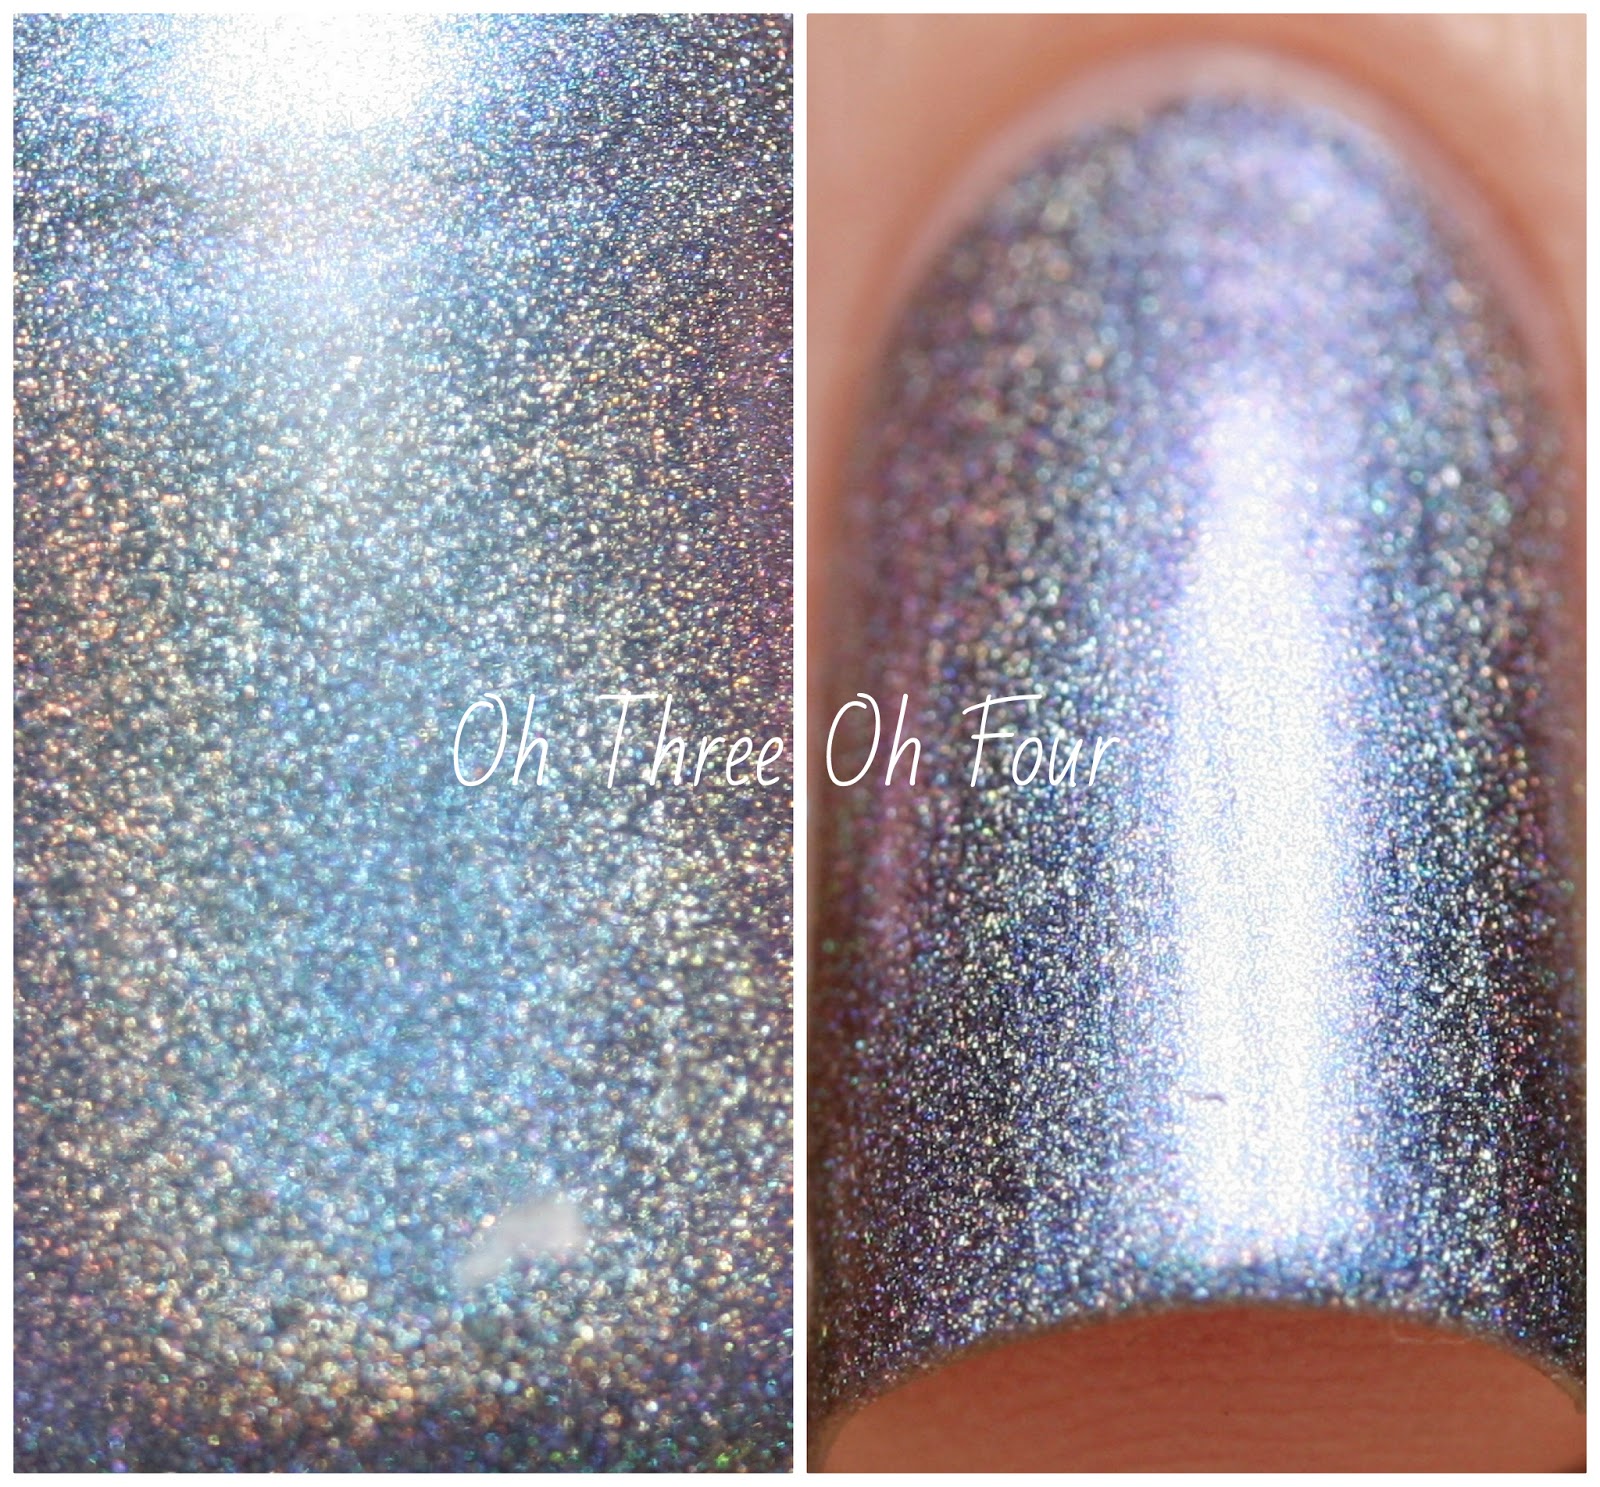 Lacquerhead Polish Double Vision Swatch